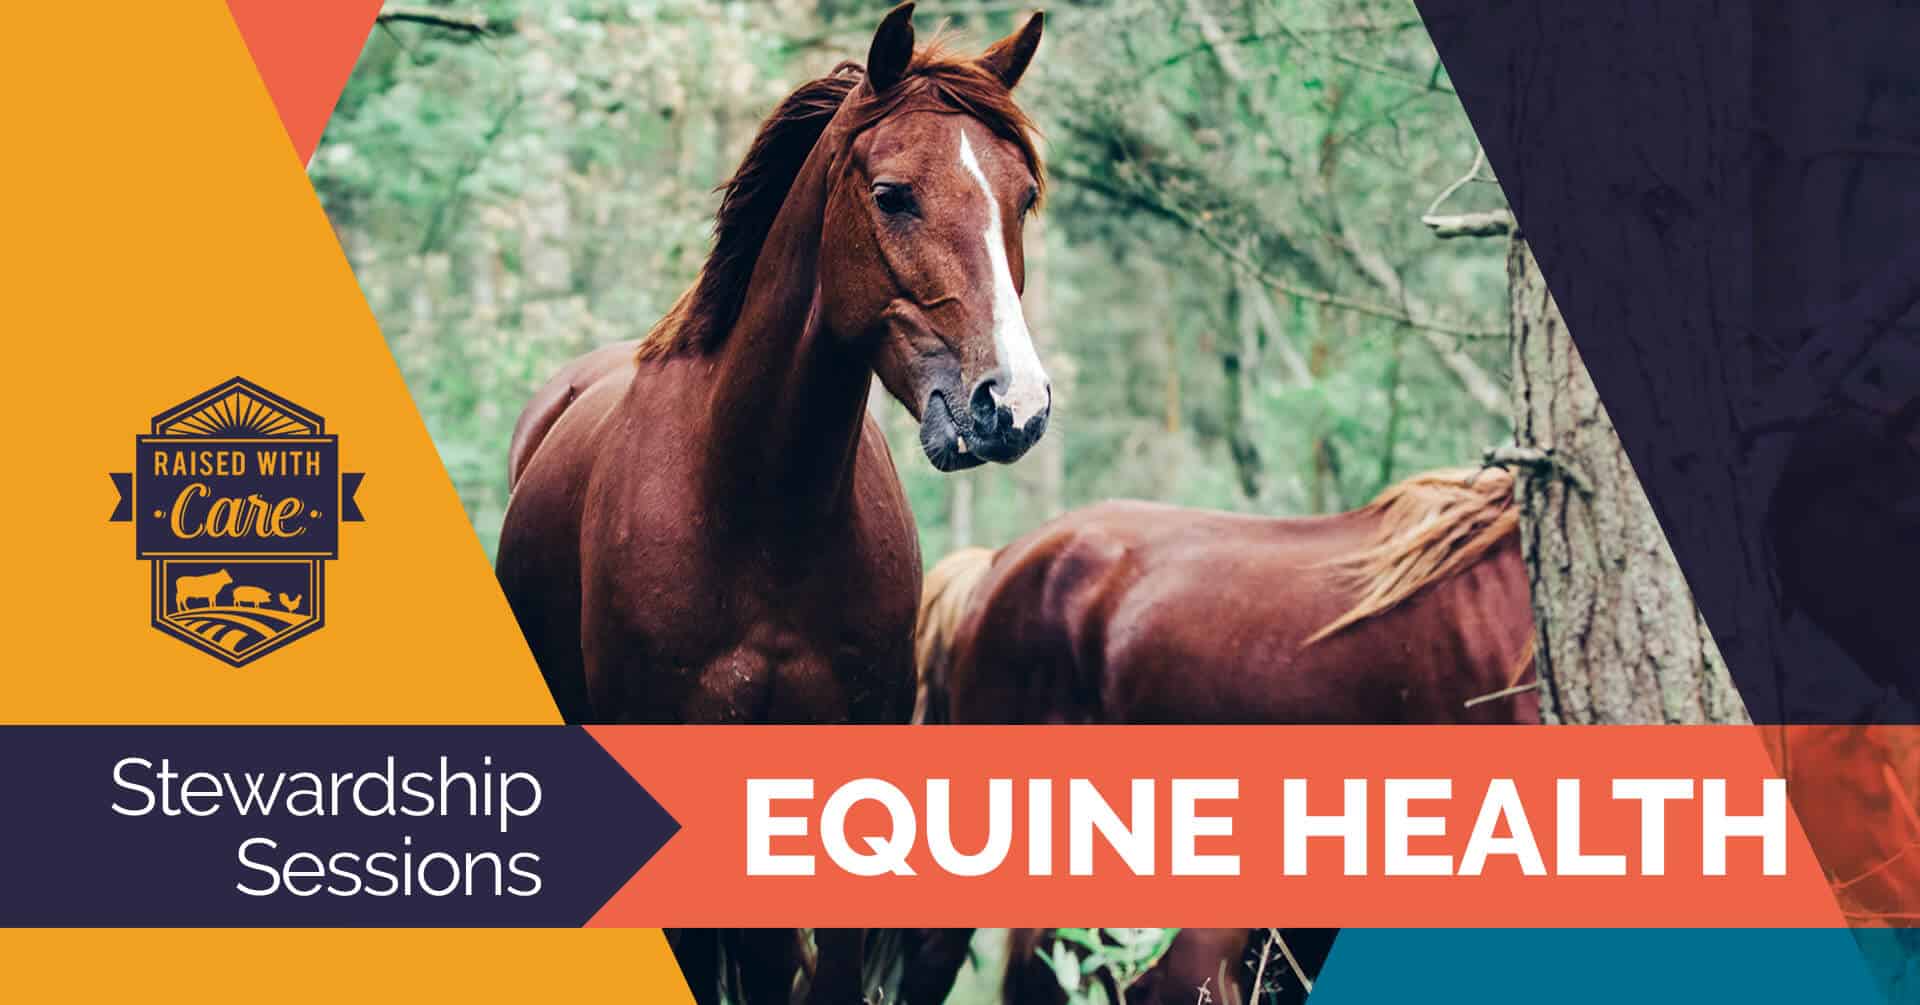 Raised With Care: Stewardship Sessions Equine Health